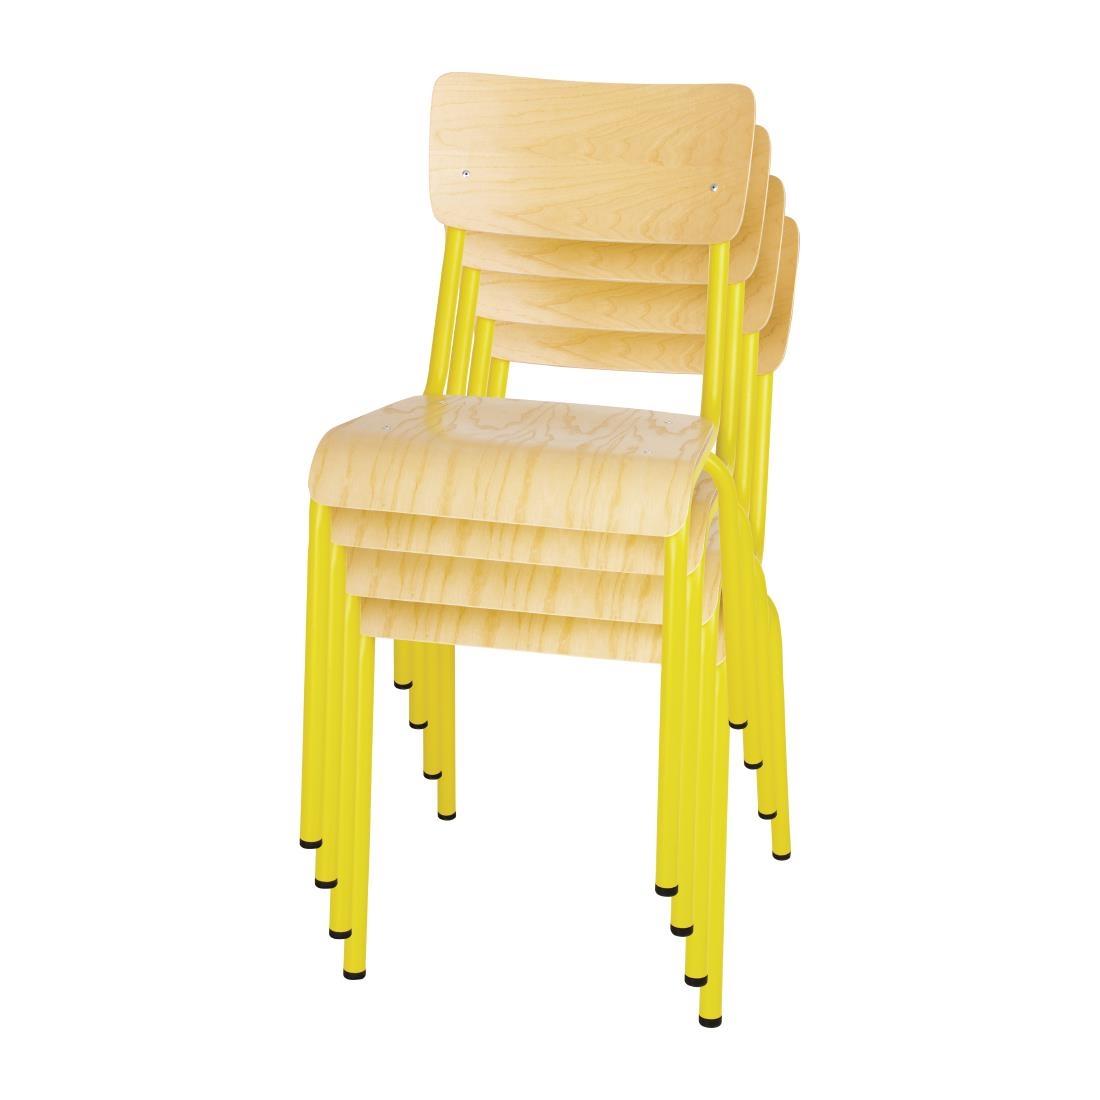 Bolero Cantina Side Chairs with Wooden Seat Pad and Backrest Yellow (Pack of 4) - FB948  - 5